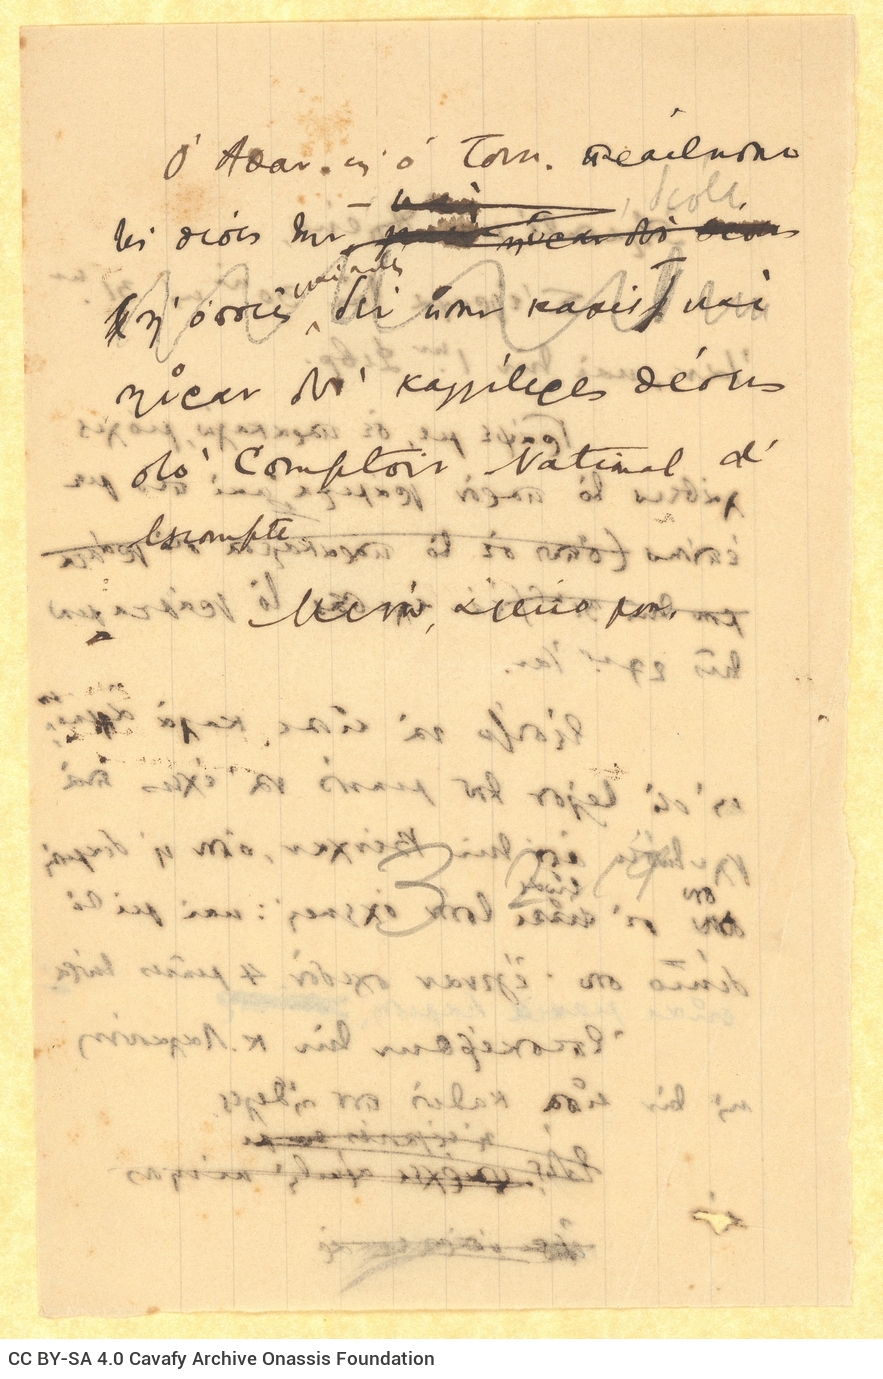 Handwritten draft letter by Cavafy to Alekos [Singopoulo] on both sides of a sheet. The poet refers to common acquaintances.